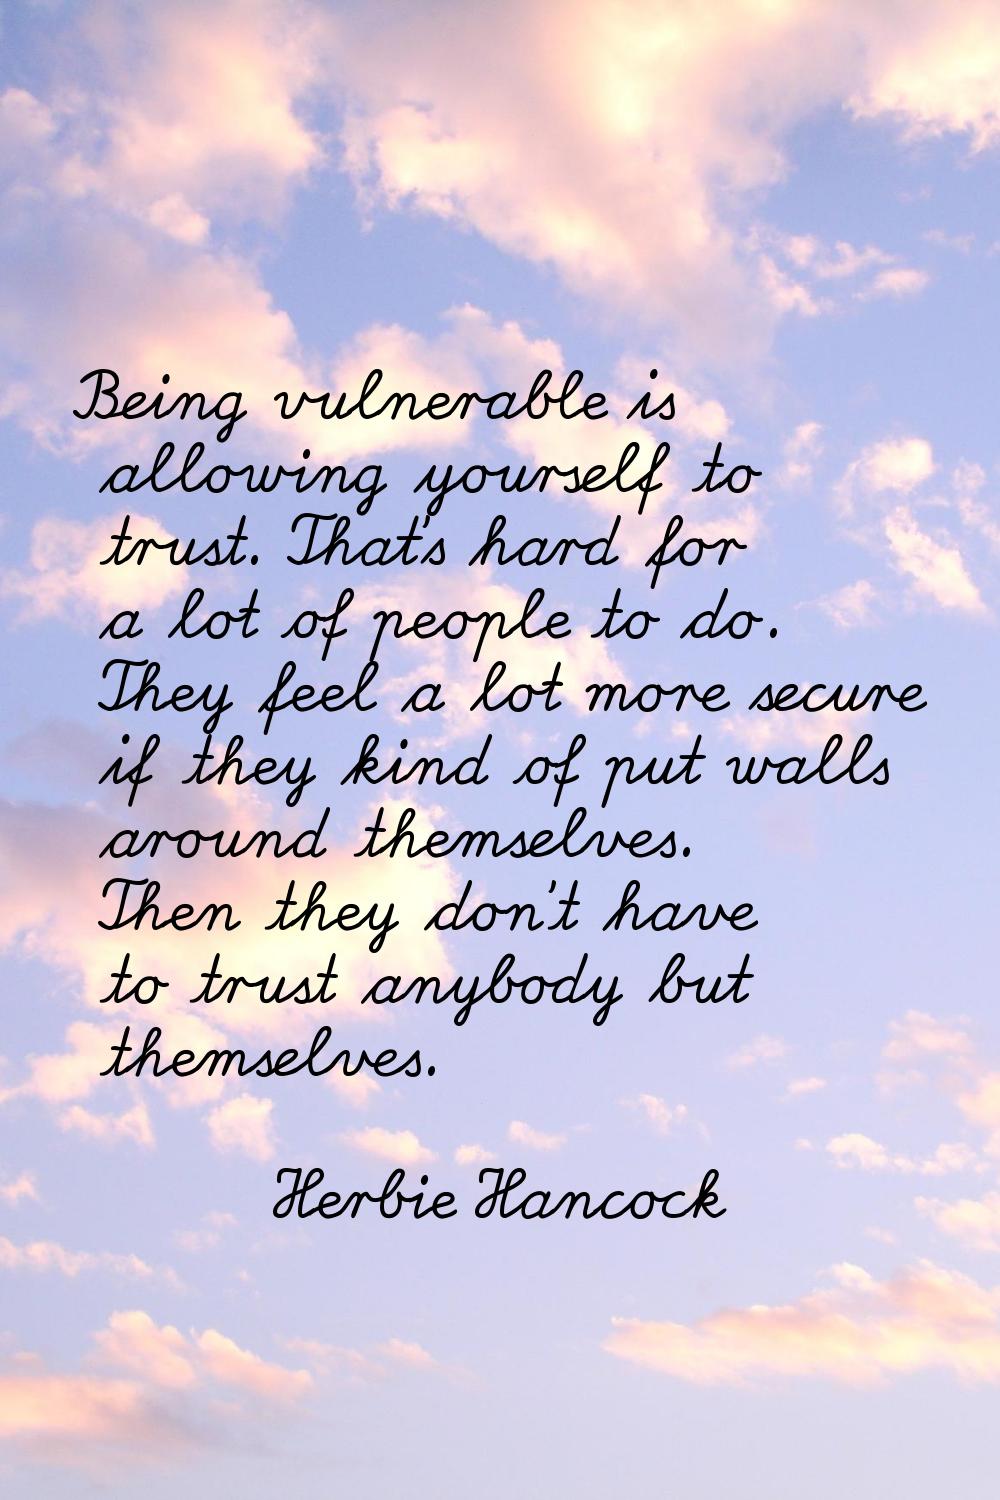 Being vulnerable is allowing yourself to trust. That's hard for a lot of people to do. They feel a 